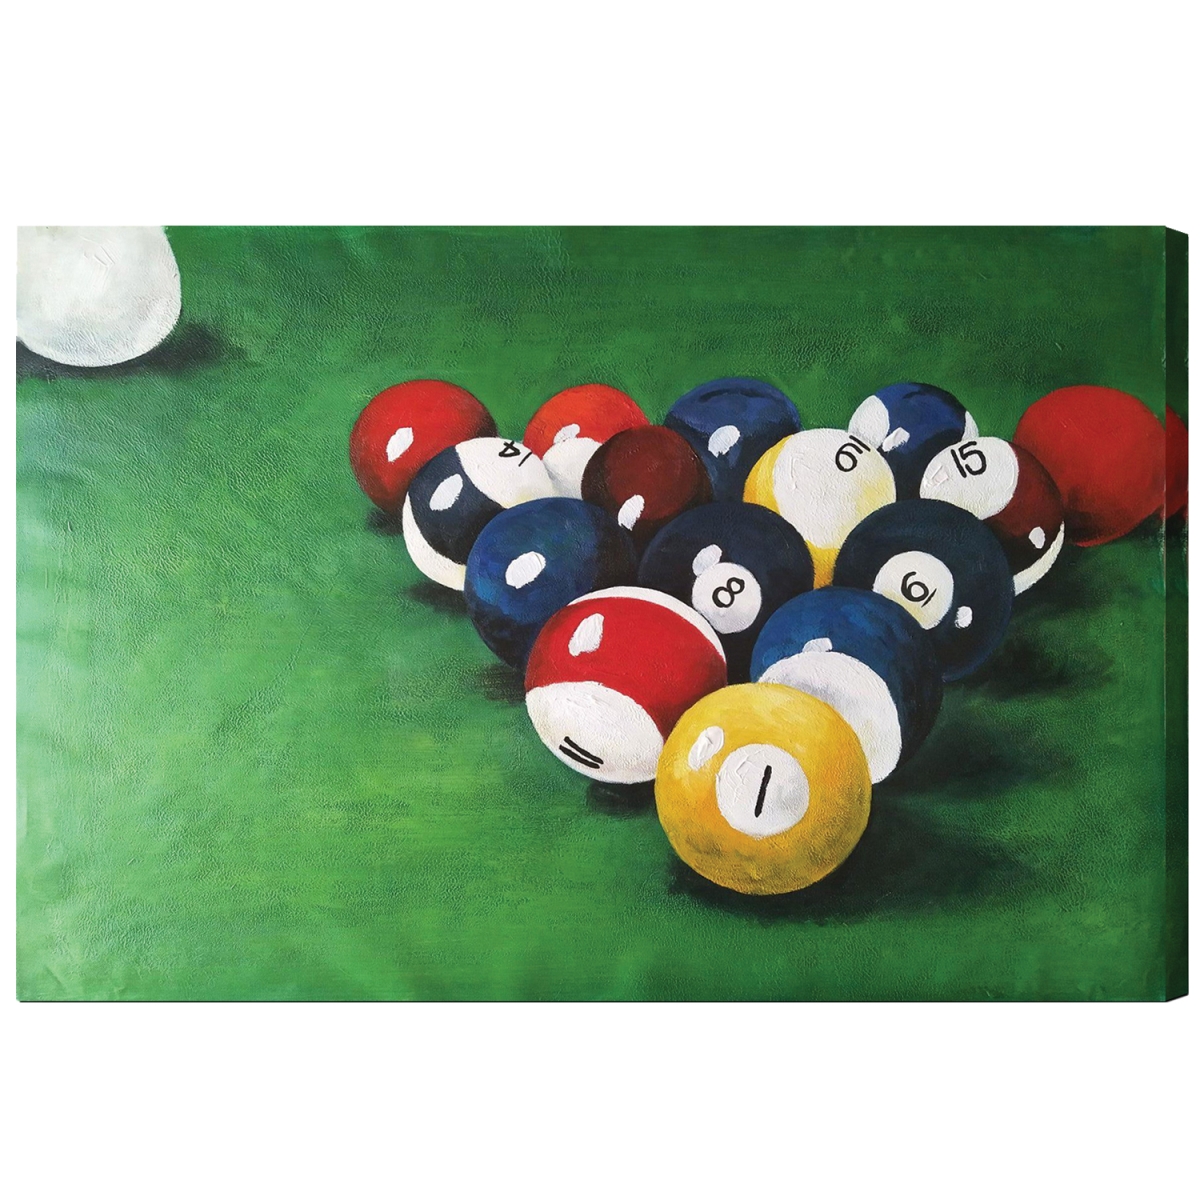 Picture of RAM Game Room OP12 36 x 24 in. Racked Billiard Balls Oil Painting on Canvas